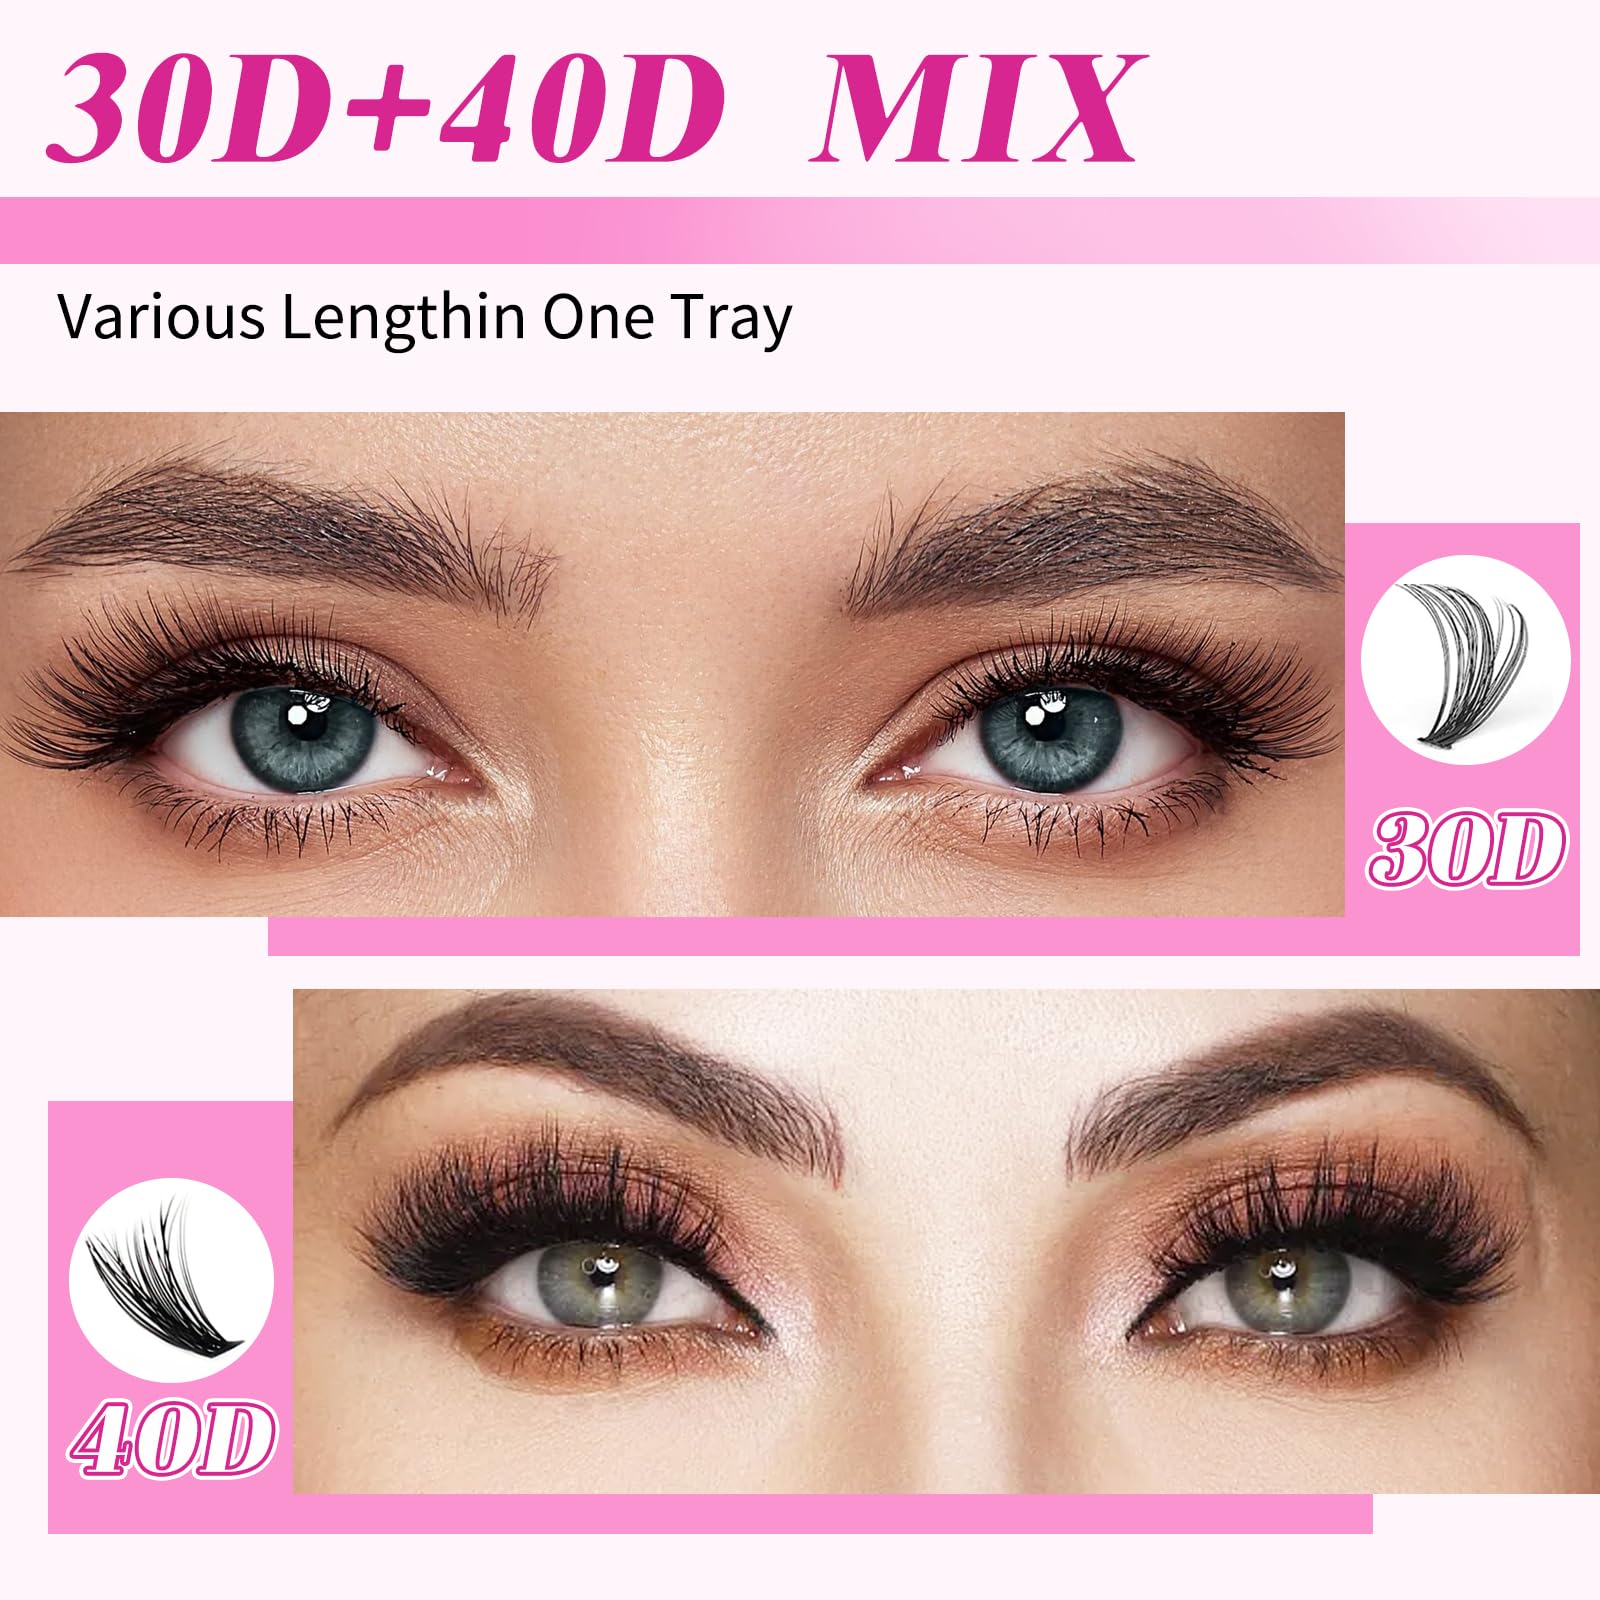 DIY Lash Extension Kit,280 Pcs Lash Clusters with Bond and Seal Cluster Lashes,Eyelash Glue and Lash Tweezers Applicator Tool, 9-16mm D-Mix Curl DIY at Home